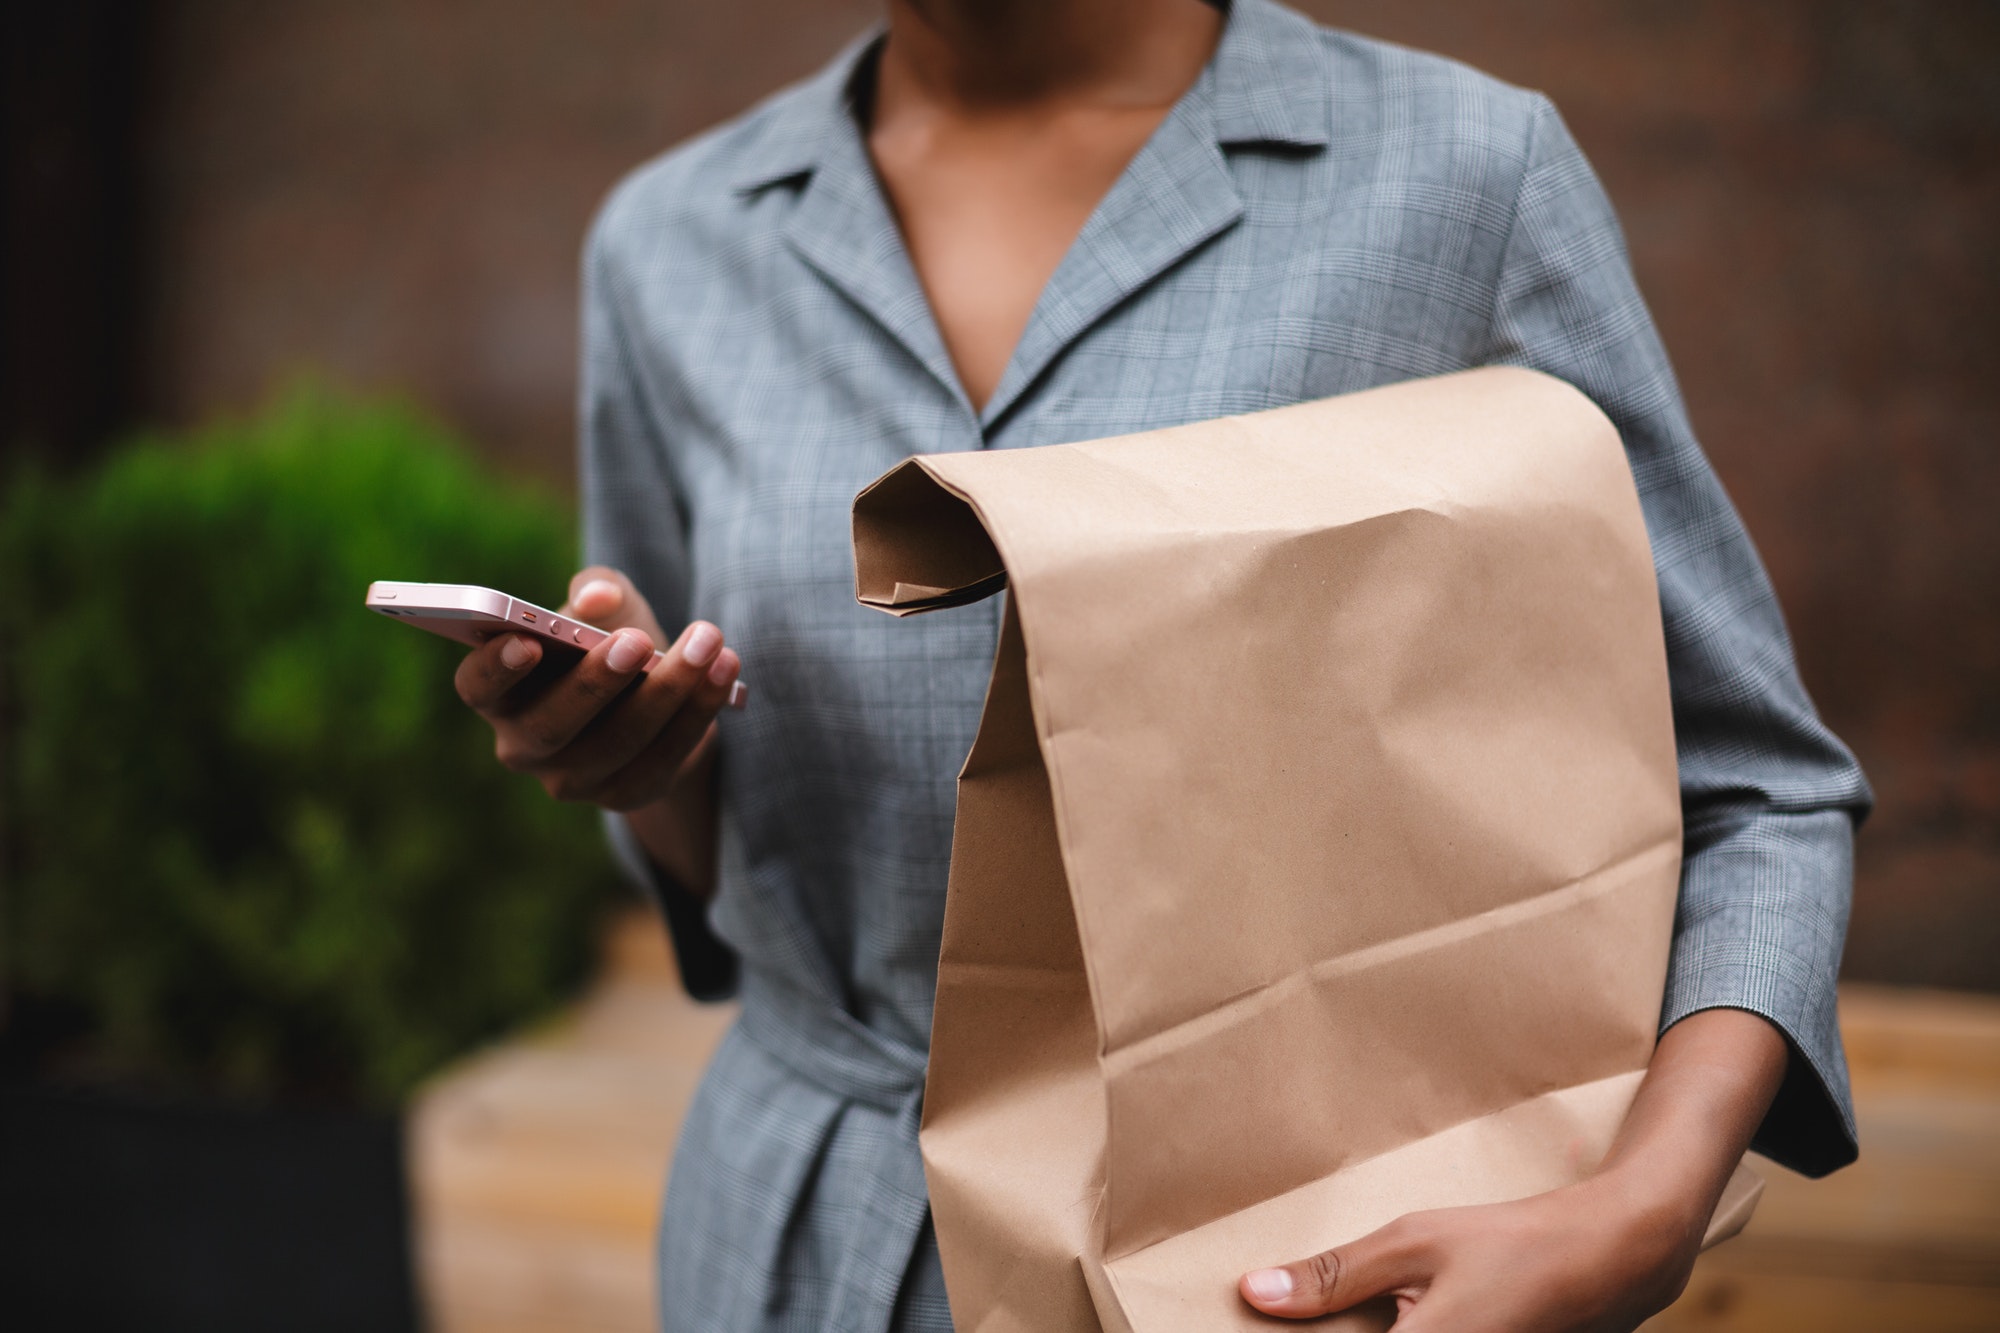 Close up photo of woman body in gray dress standing and holding paper bag